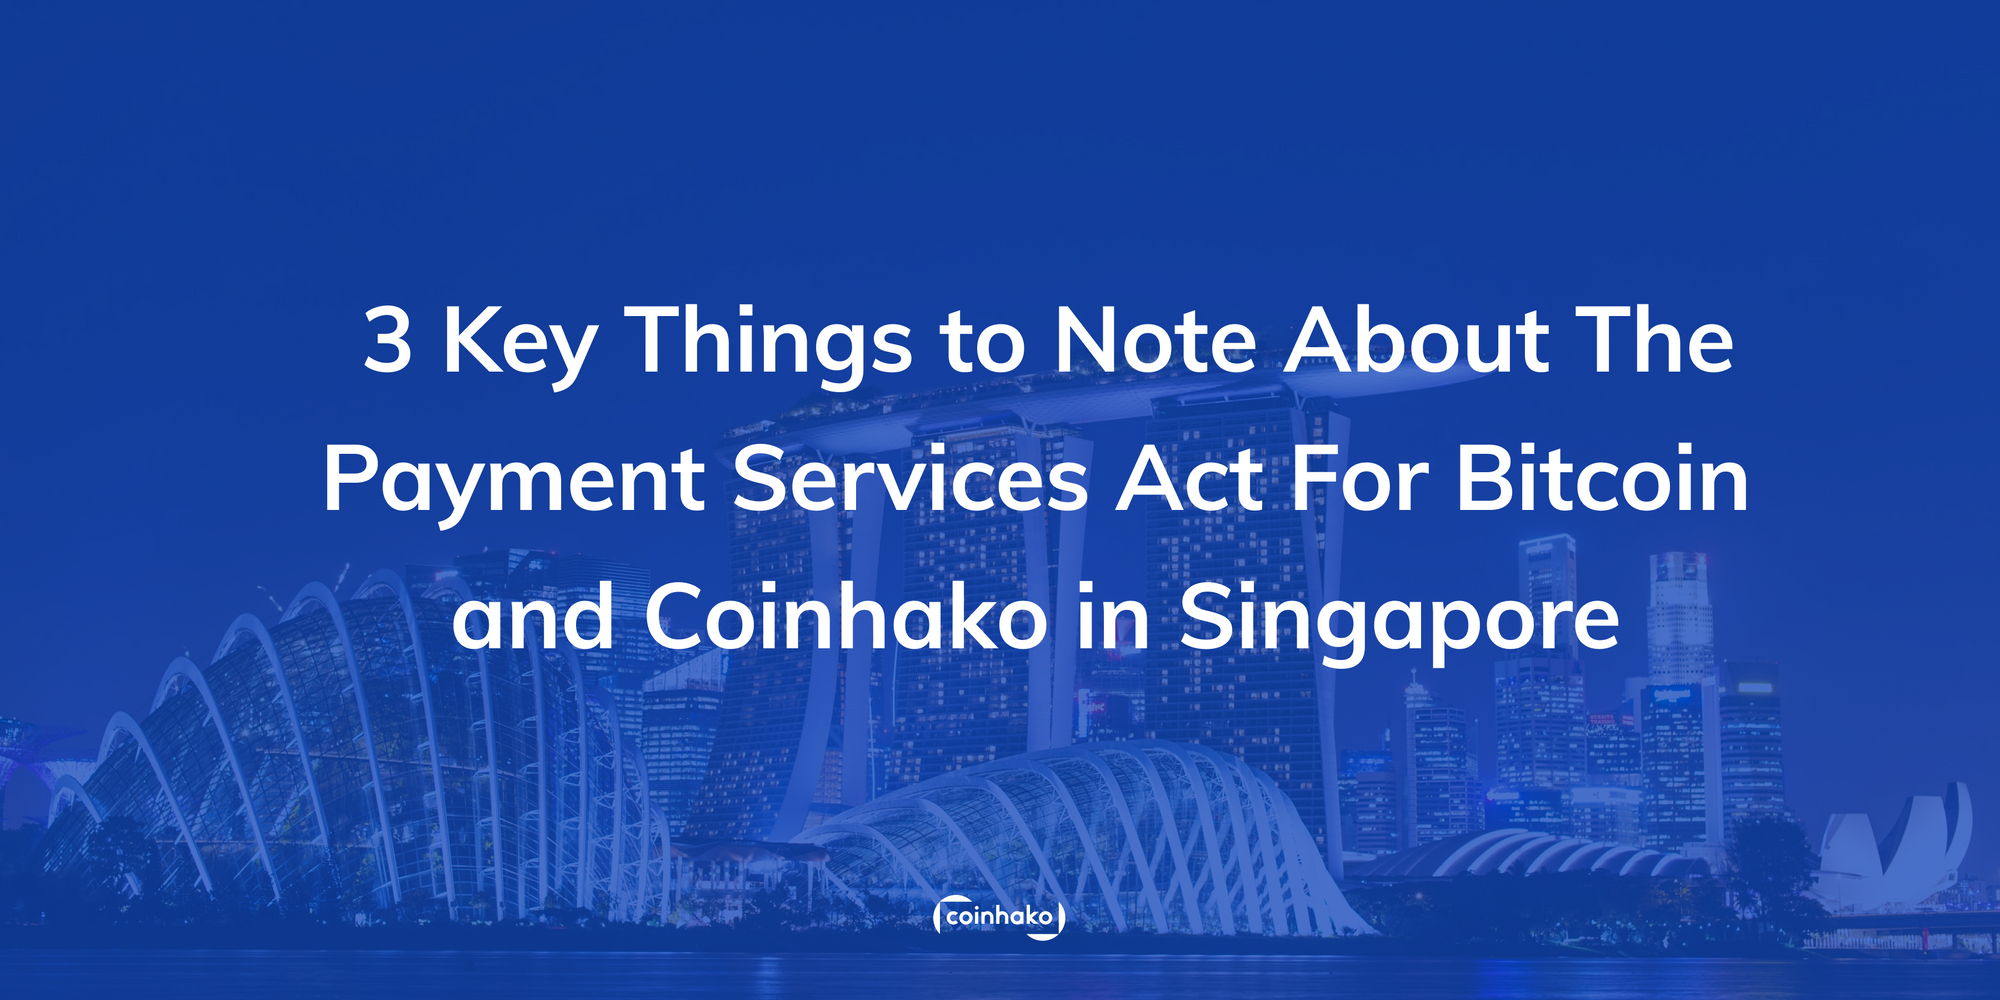 3 Key Things About The Payment Services Act For Bitcoin, Cryptocurrency, DPTs, and Coinhako